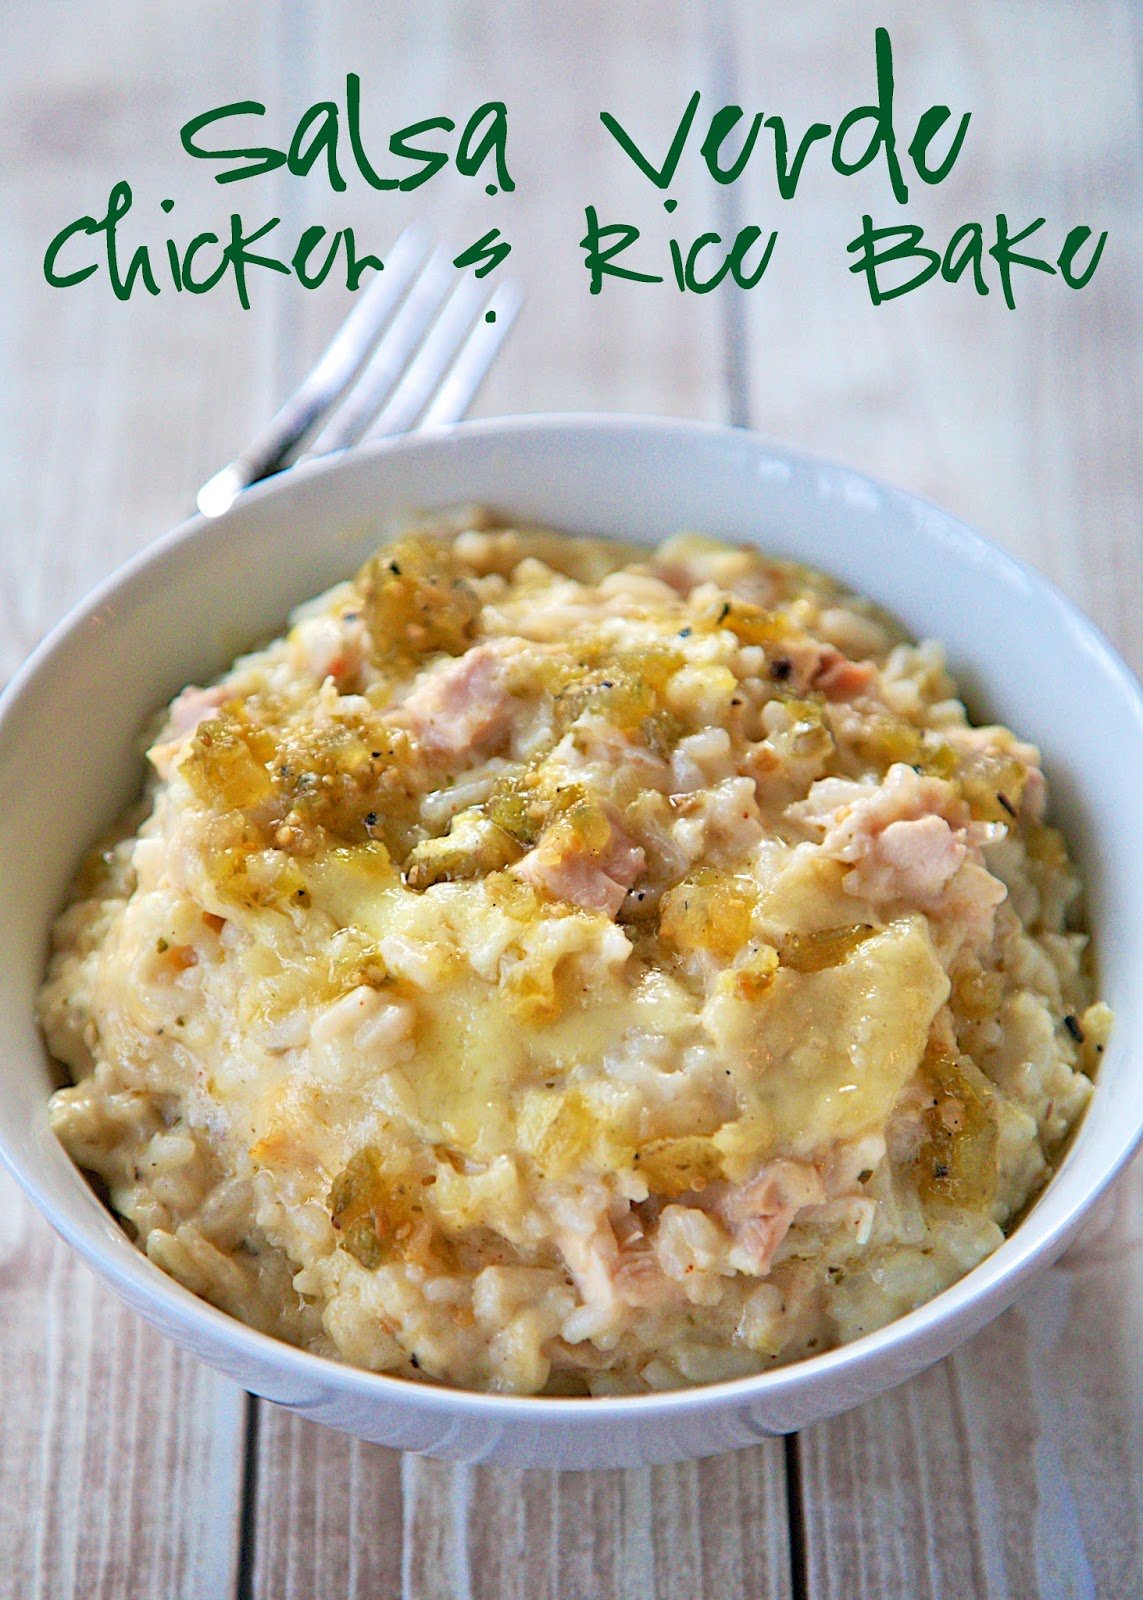 Salsa Verde Chicken and Rice Bake Recipe - chicken, cheese and rice tossed in a creamy salsa verde sour cream sauce. Ready in 20 minutes! No cream of anything soup!! We gobbled this up! Quick and delicious Mexican recipe.